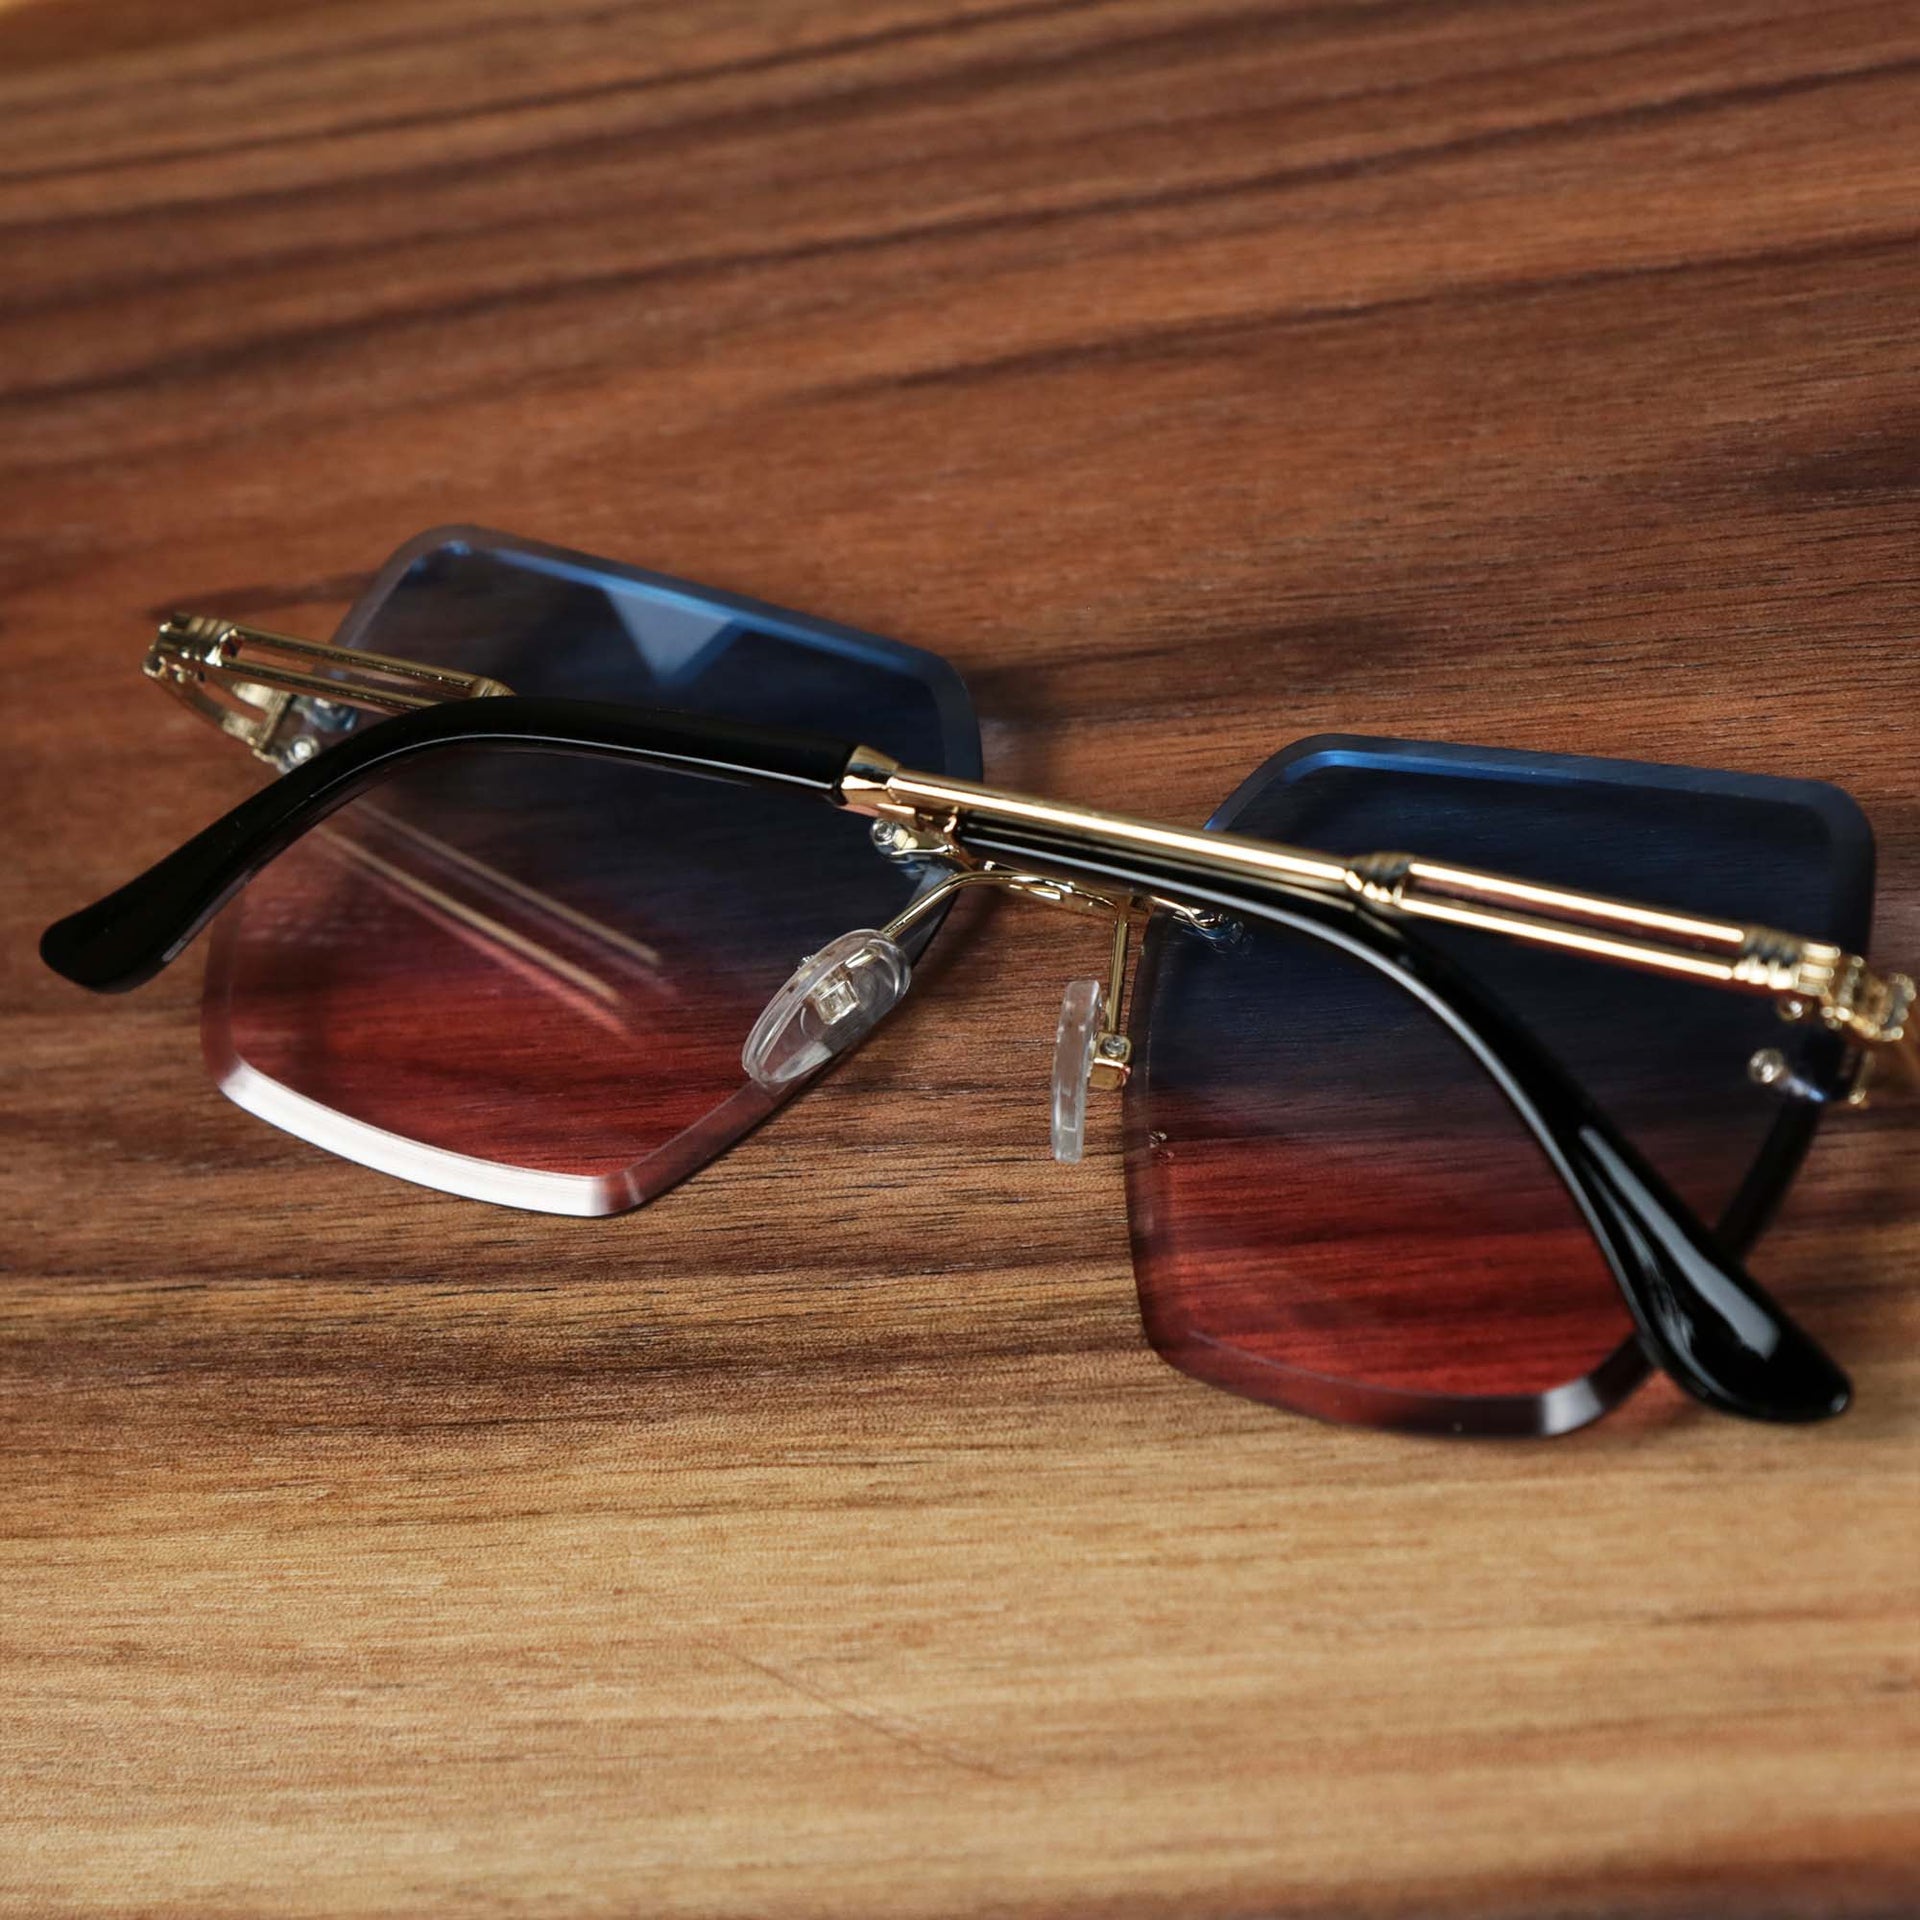 The Large Lightweight Frame Pink Blue Gradient Lens Sunglasses with Gold Frame folded up